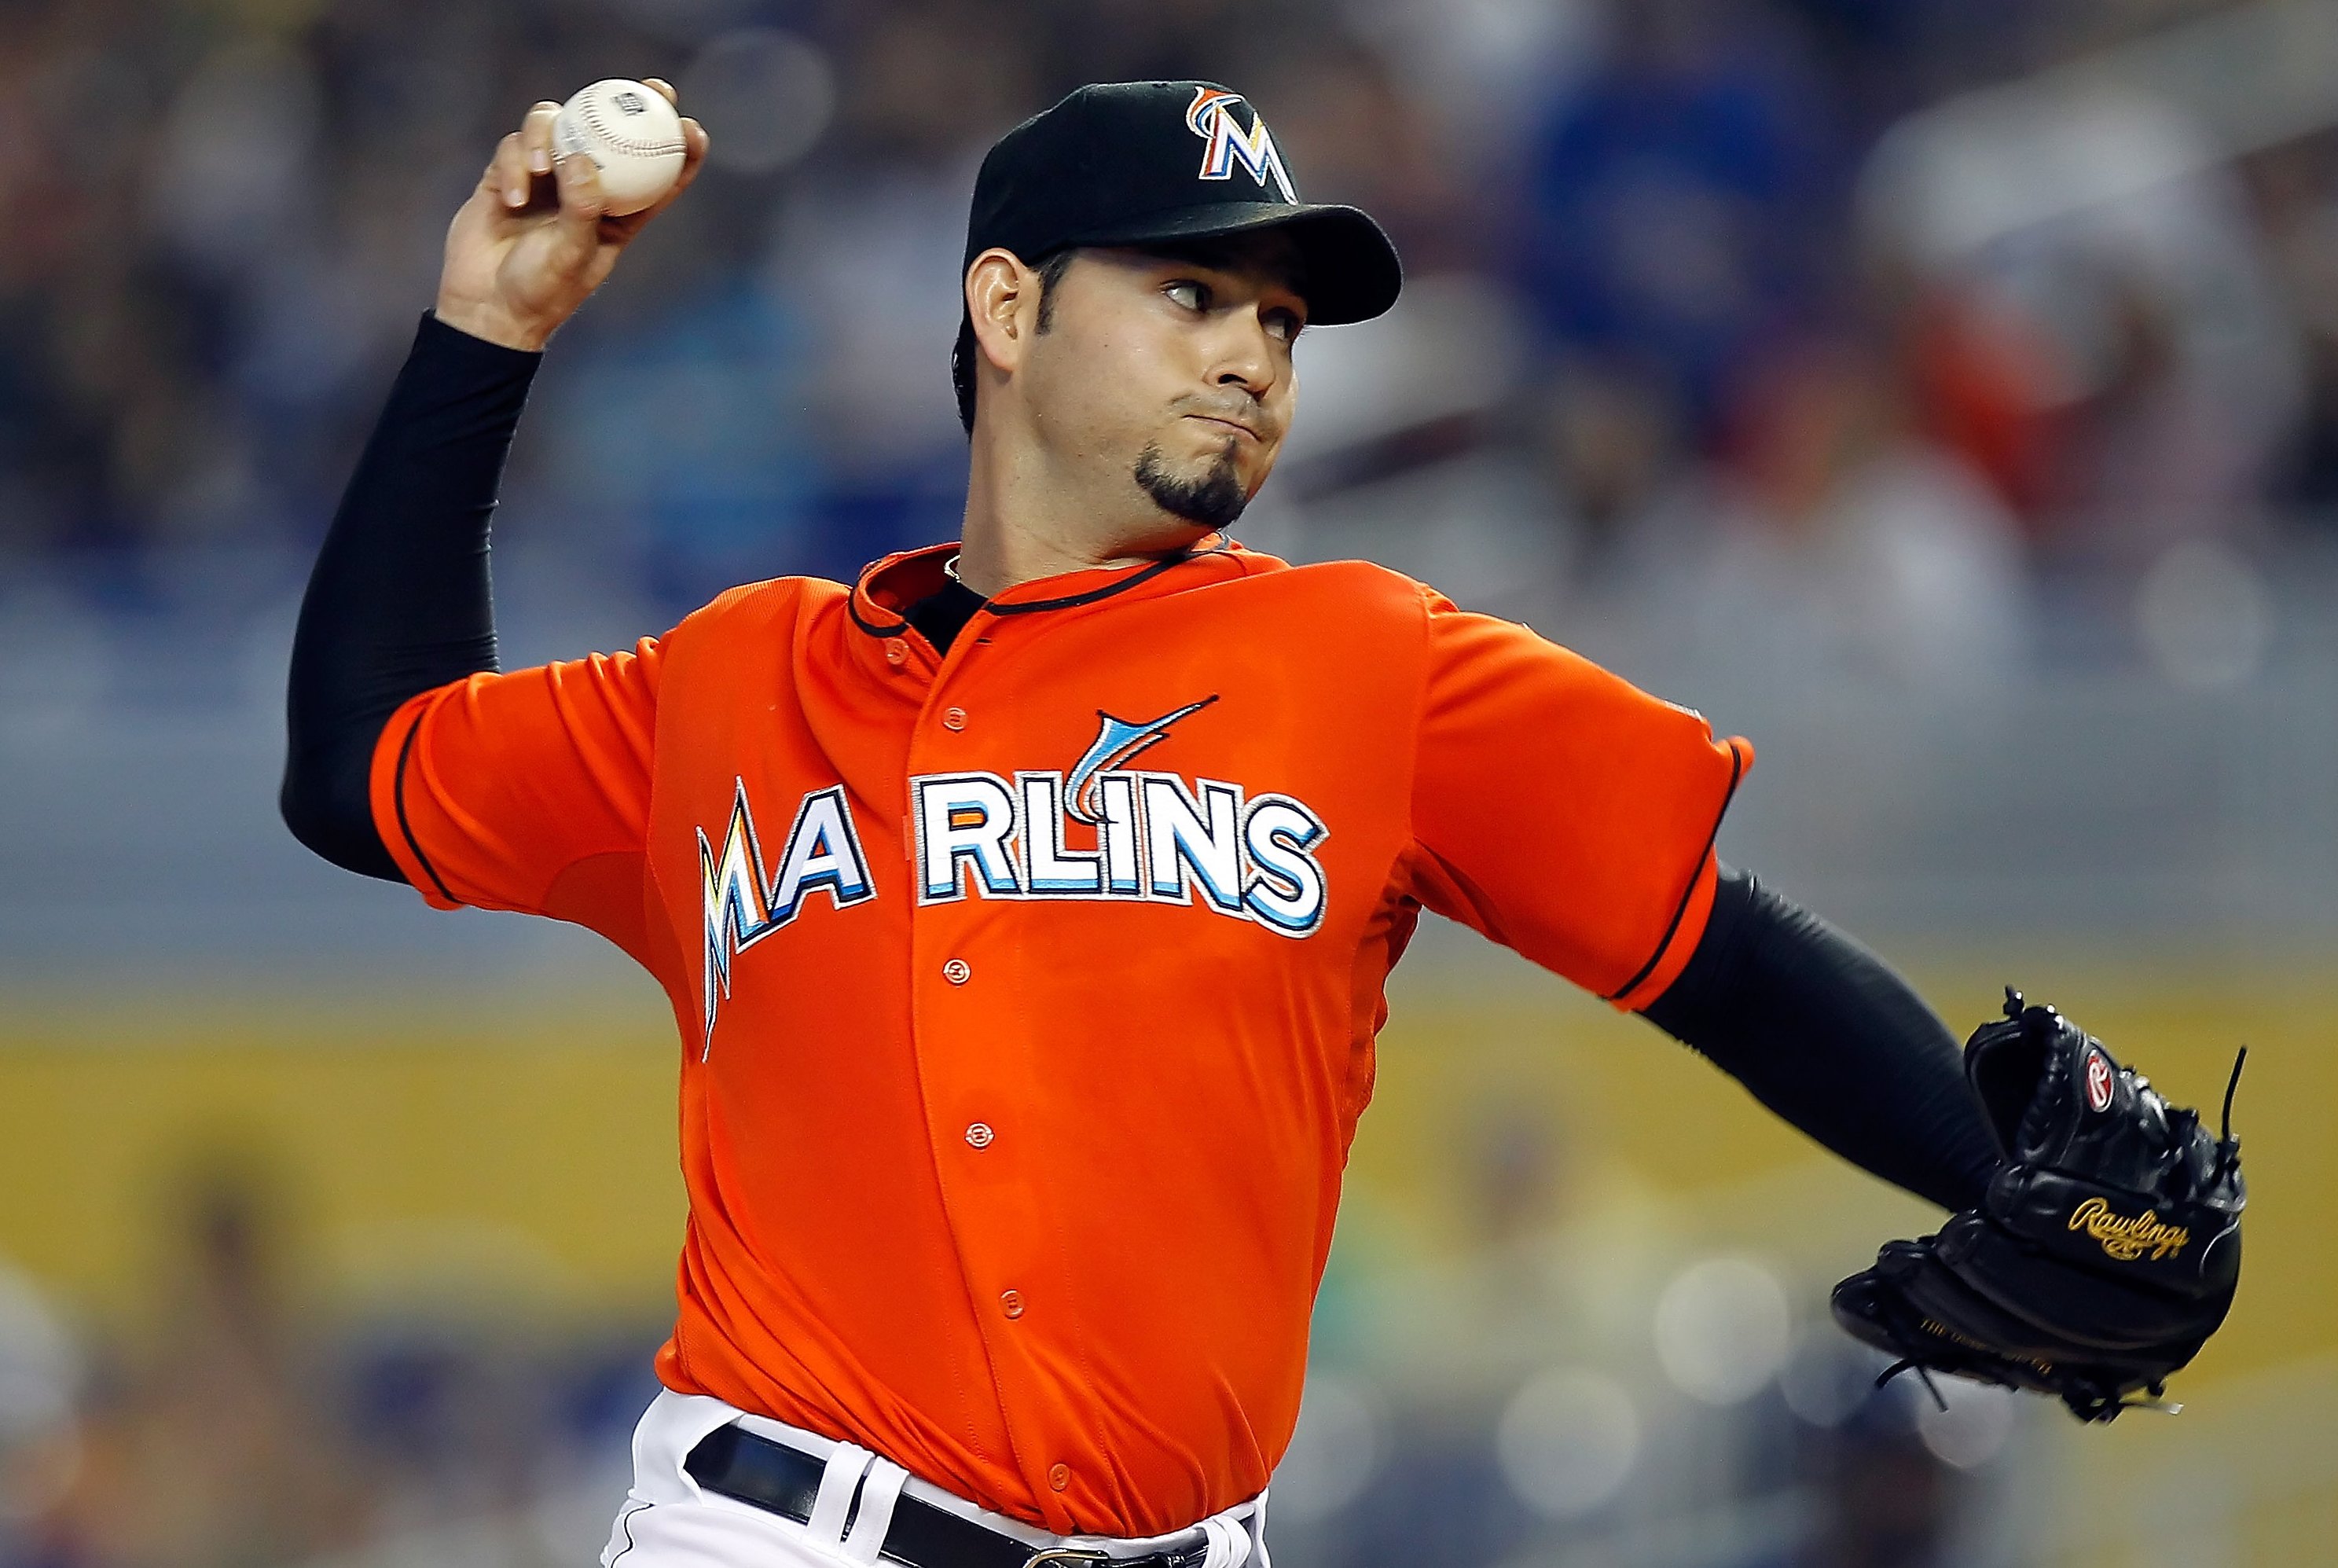 The Miami Marlins have been better than you think